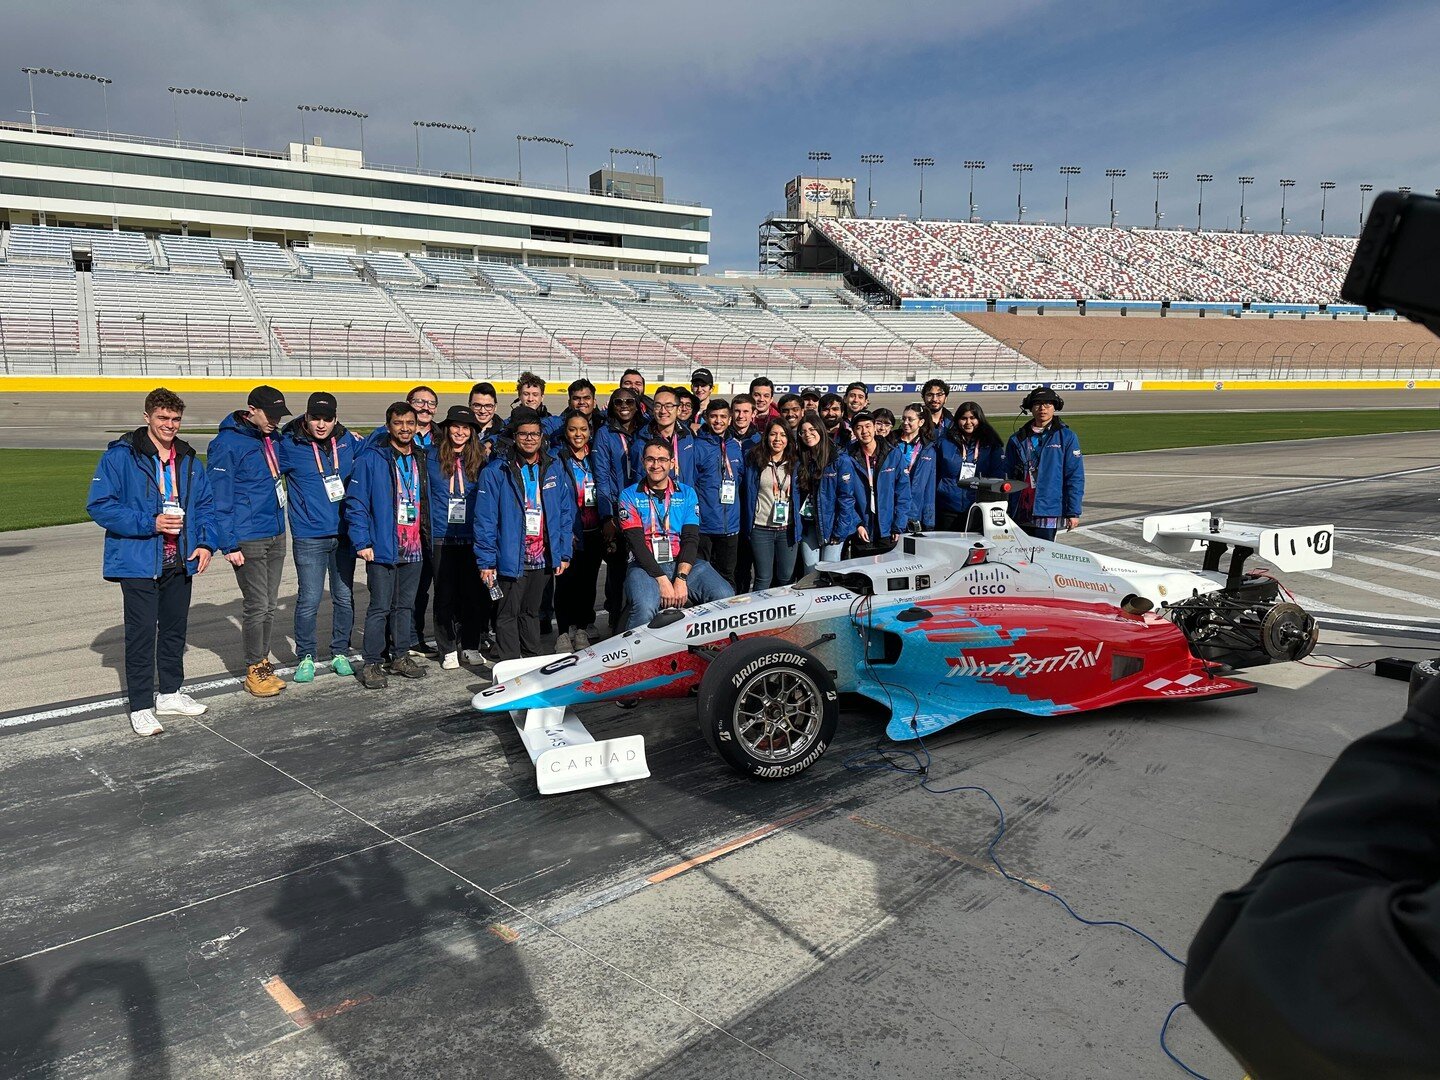 It has been a remarkable week full of highs and lows as part of the @indyachallenge at the @lvmotorspeedway during @ces on Saturday.

Three days before competition, our car suffered a hit on the track that damaged our engine severely. Our lead vehicl